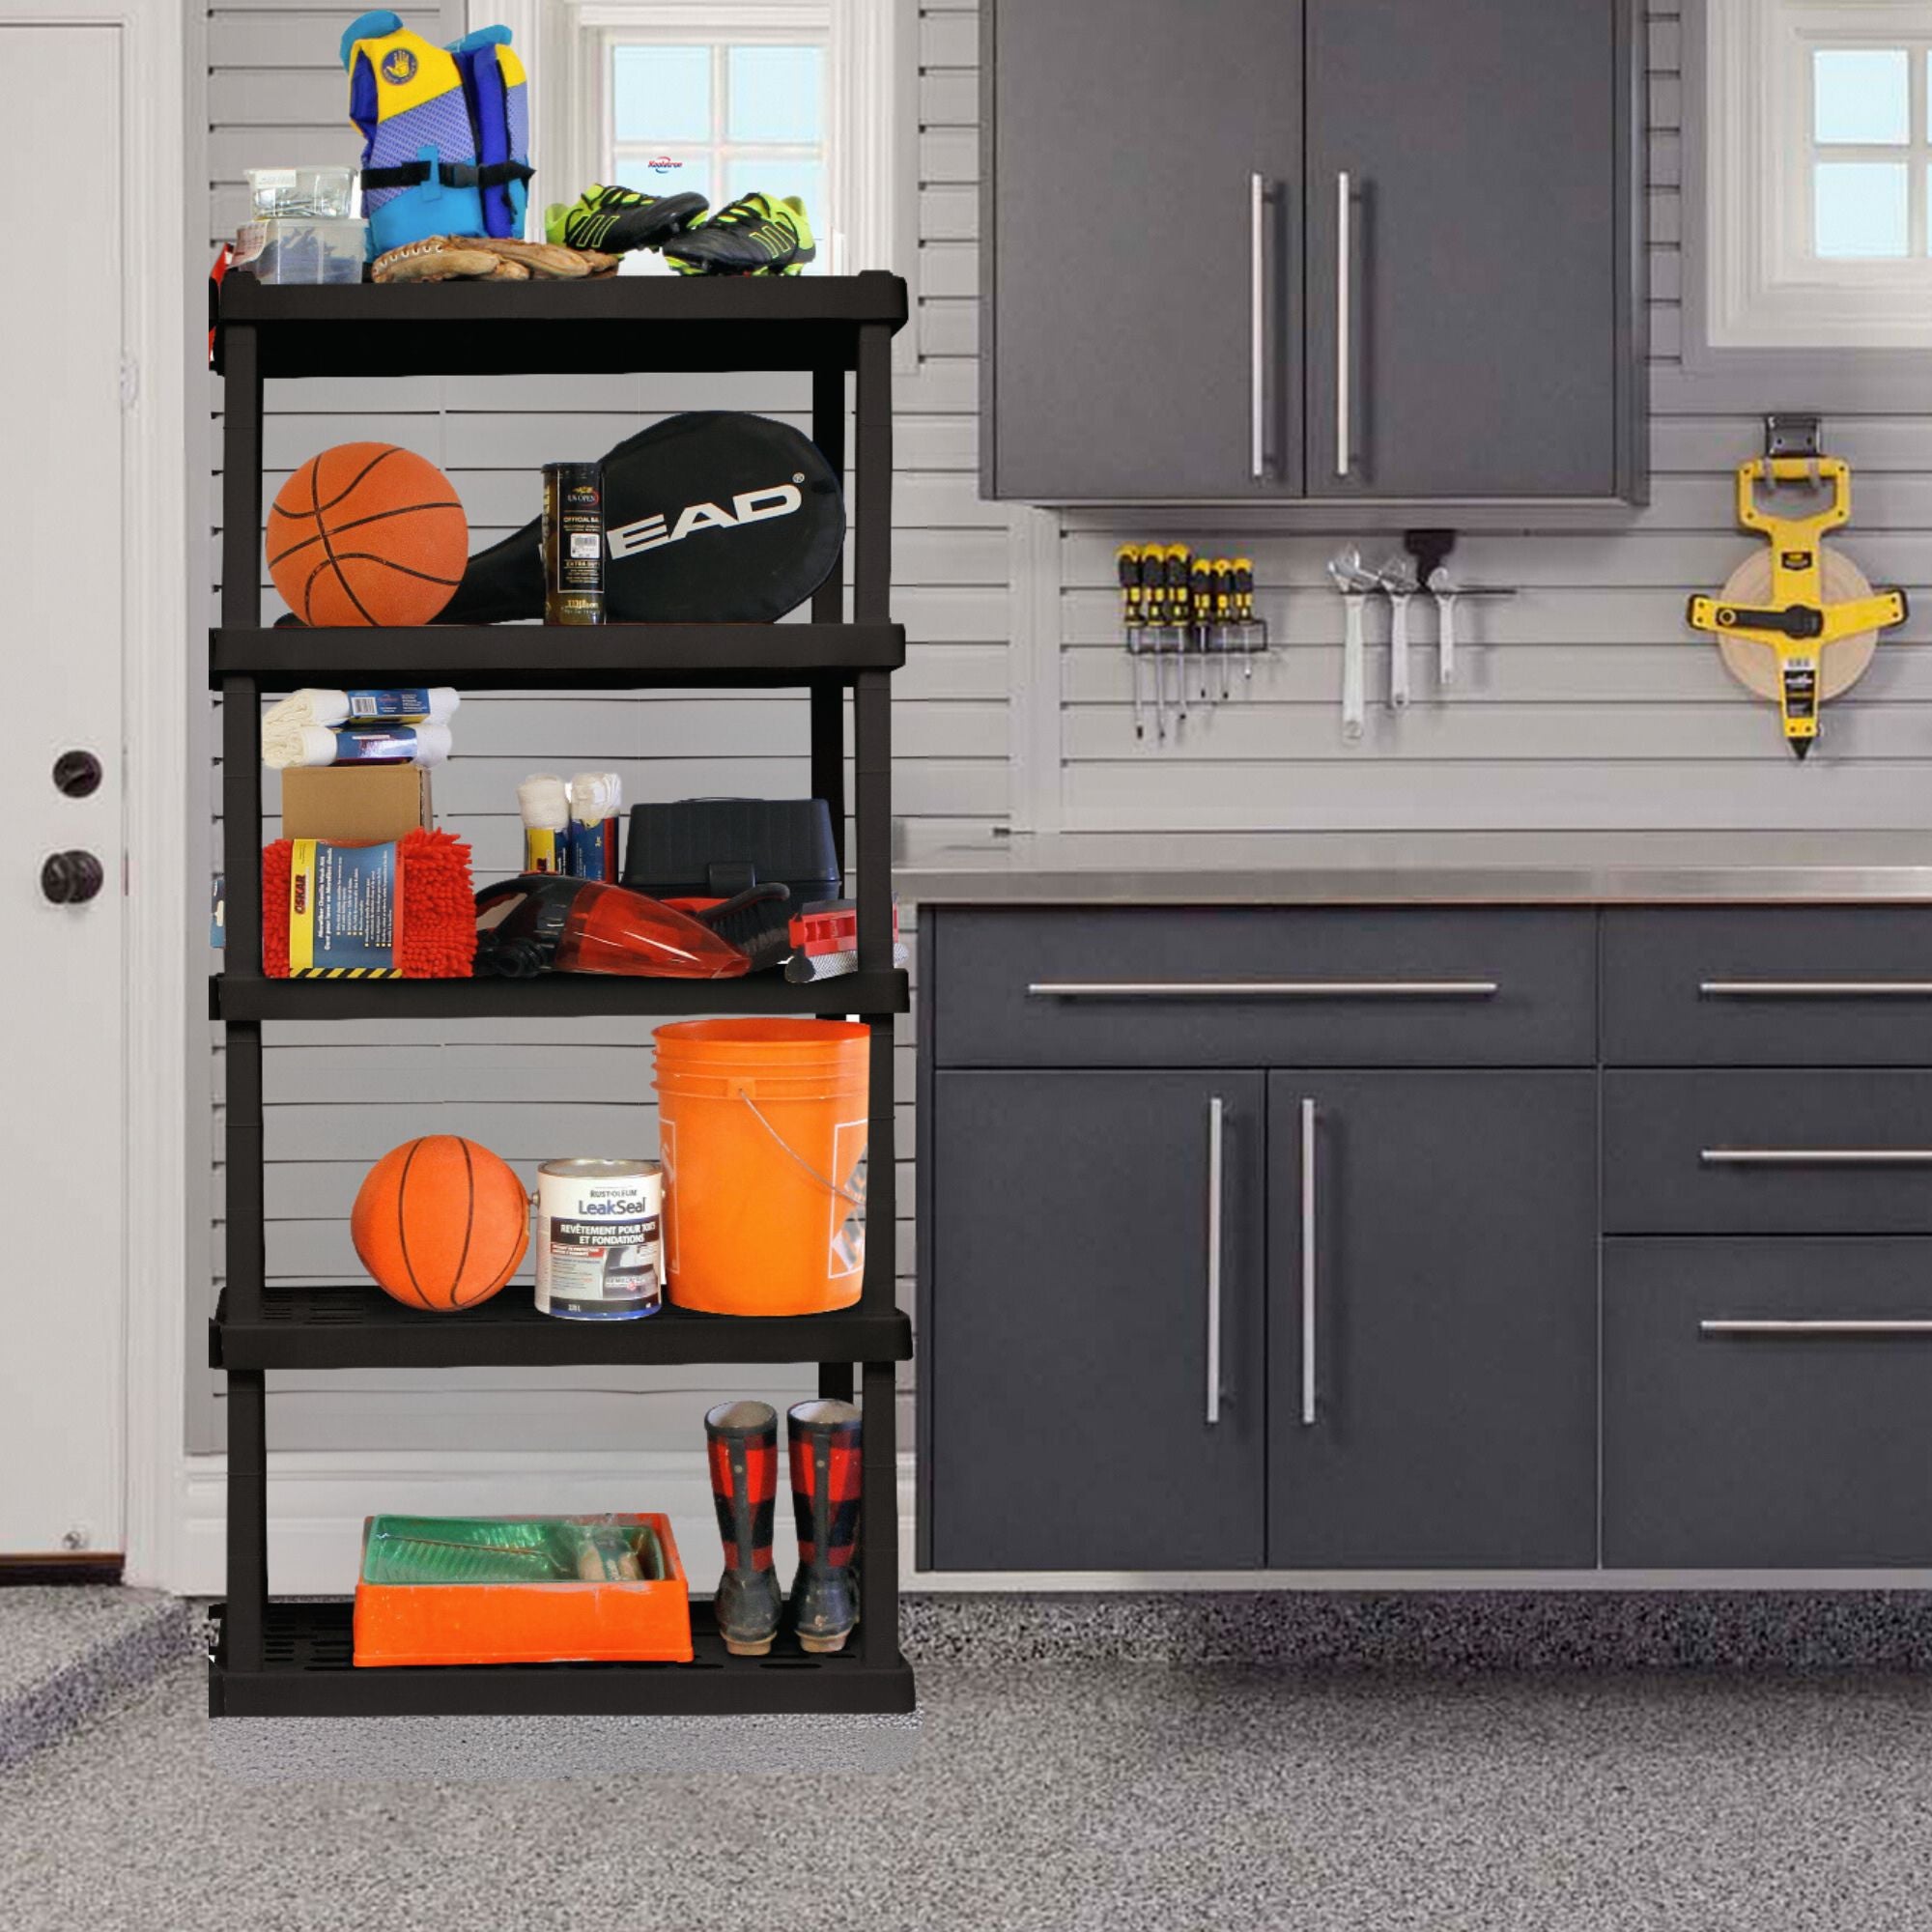 Oskar 5-tier shelving unit loaded with sports and outdoor equipment in a garage beside a gray workbench